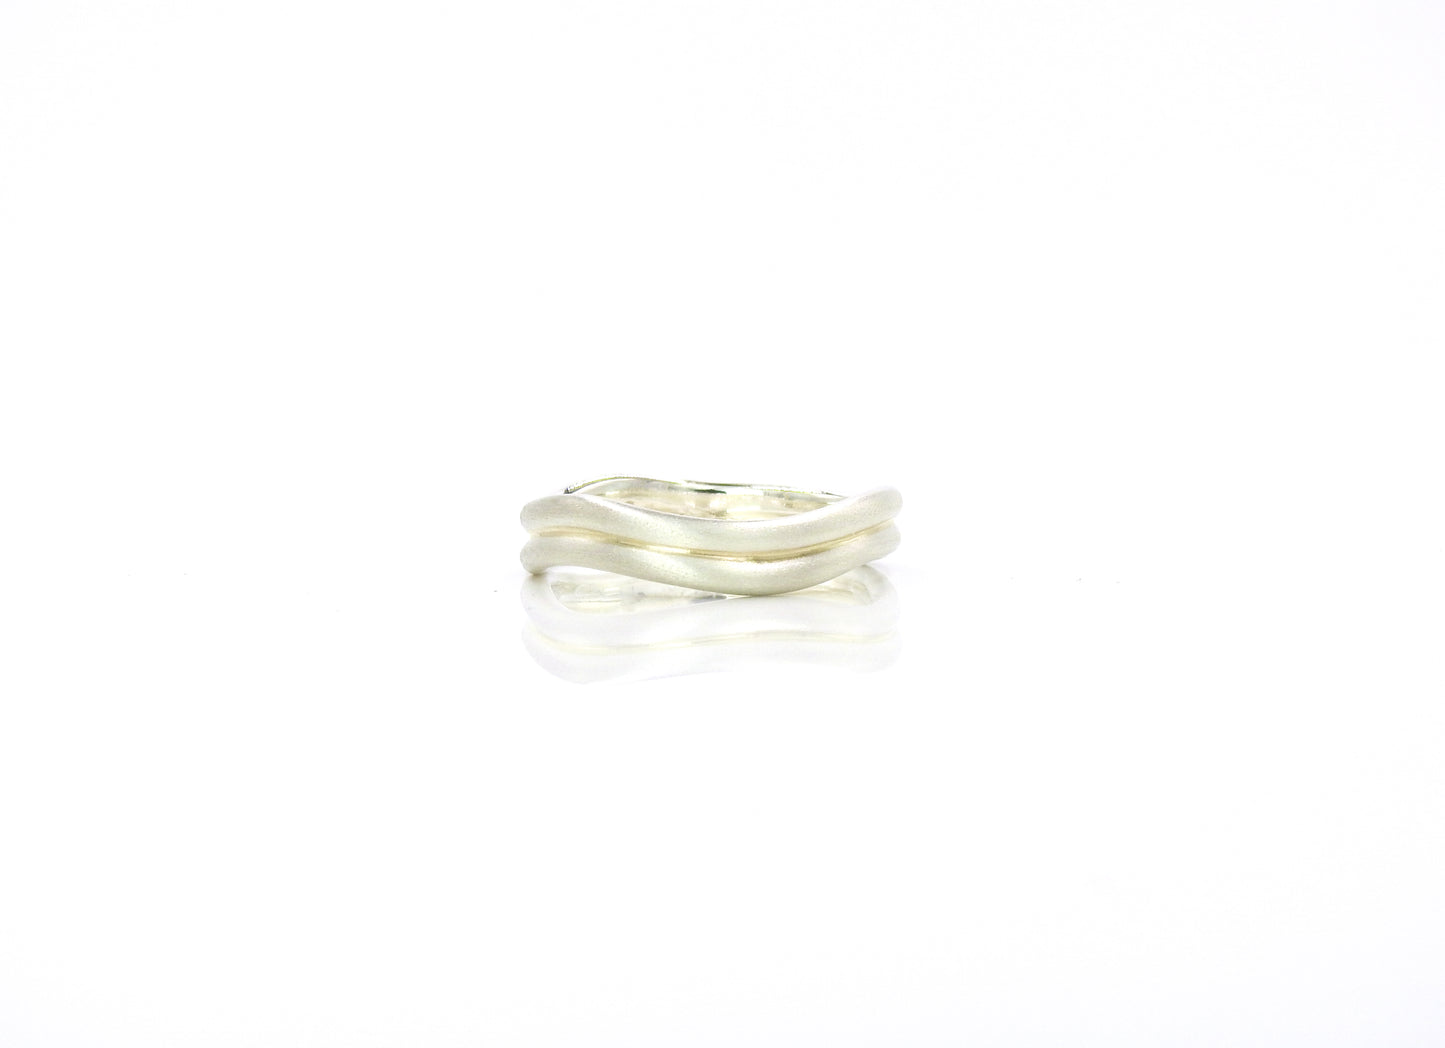 R i p p l e ring with gold shimmer